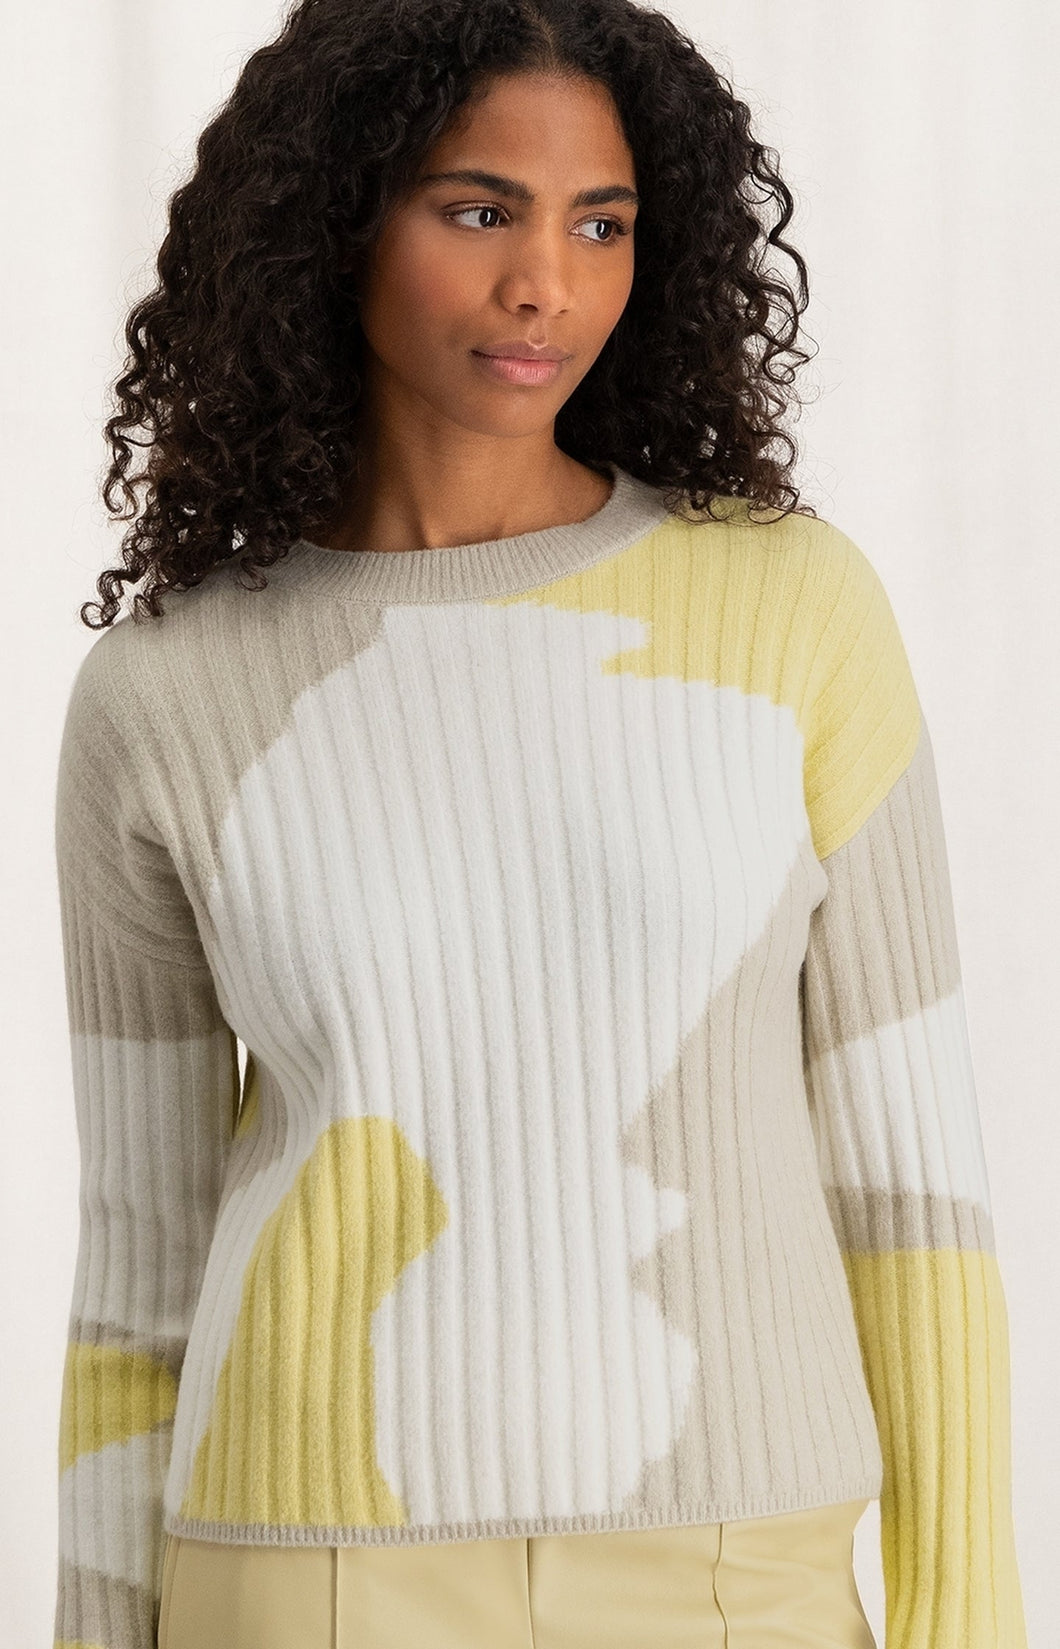 Jacquard sweater with crewneck, long sleeves and rib details - Parsnip Yellow Dessin - Type: closeup